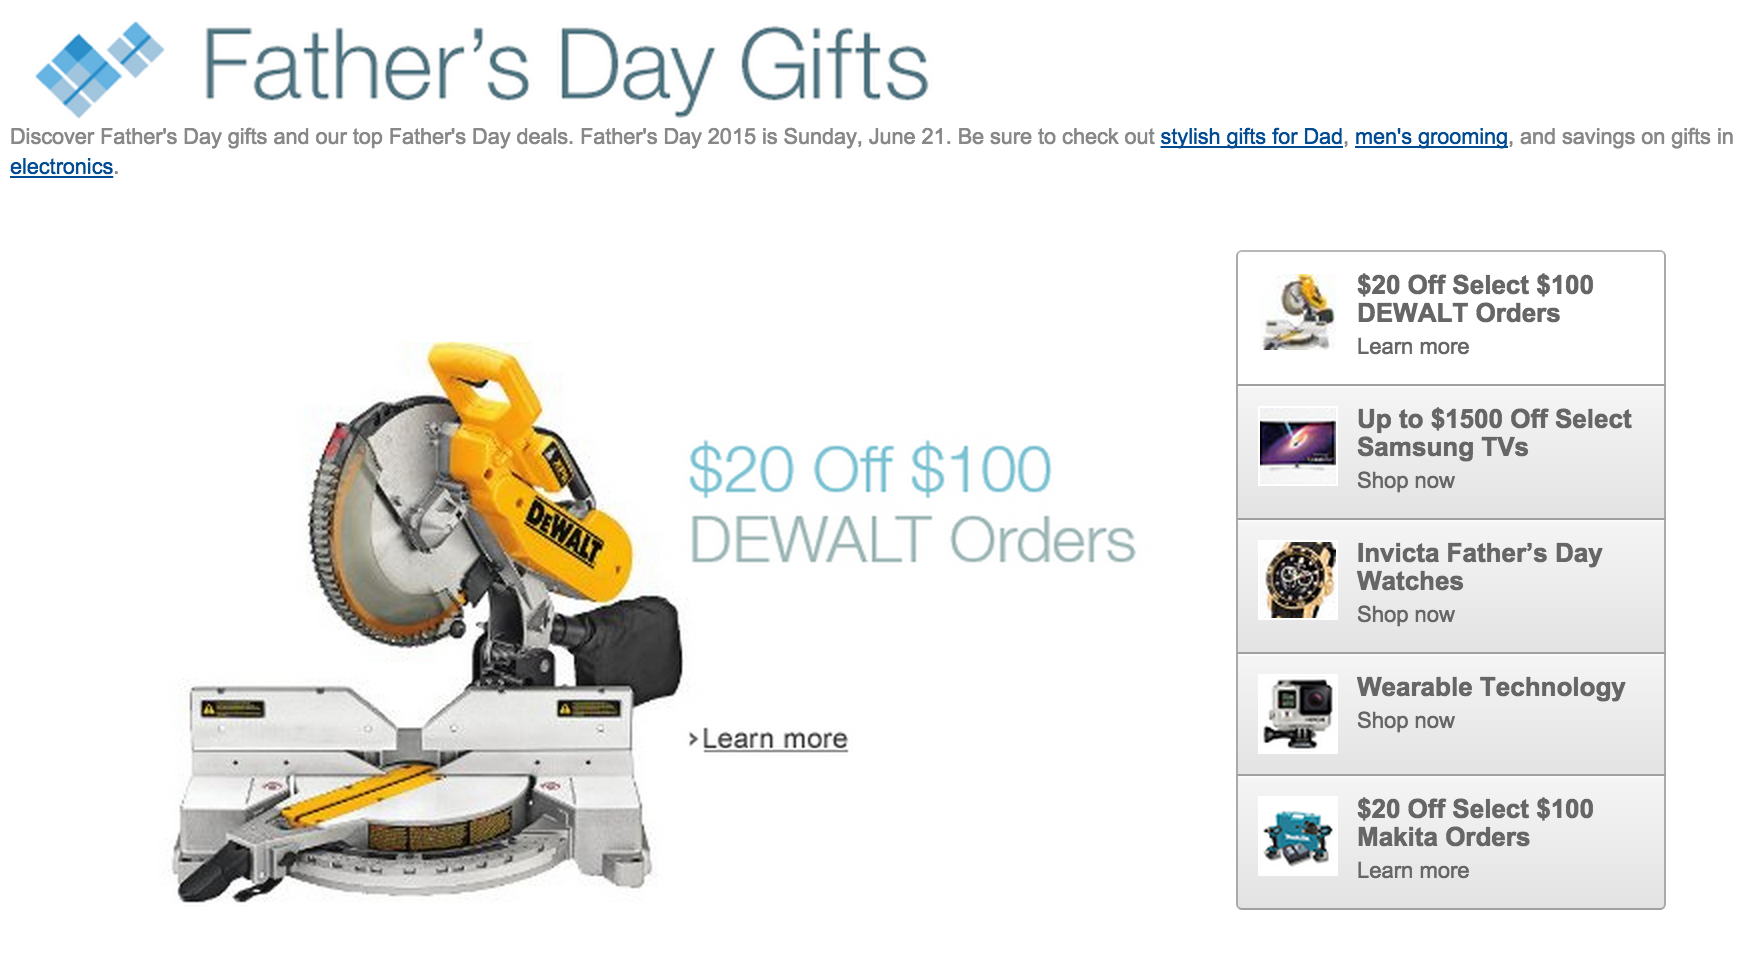 Father's Day Deals - Black & Decker Tools extra $10 off $50: Cordless 20V  MAX Drill $45, much more